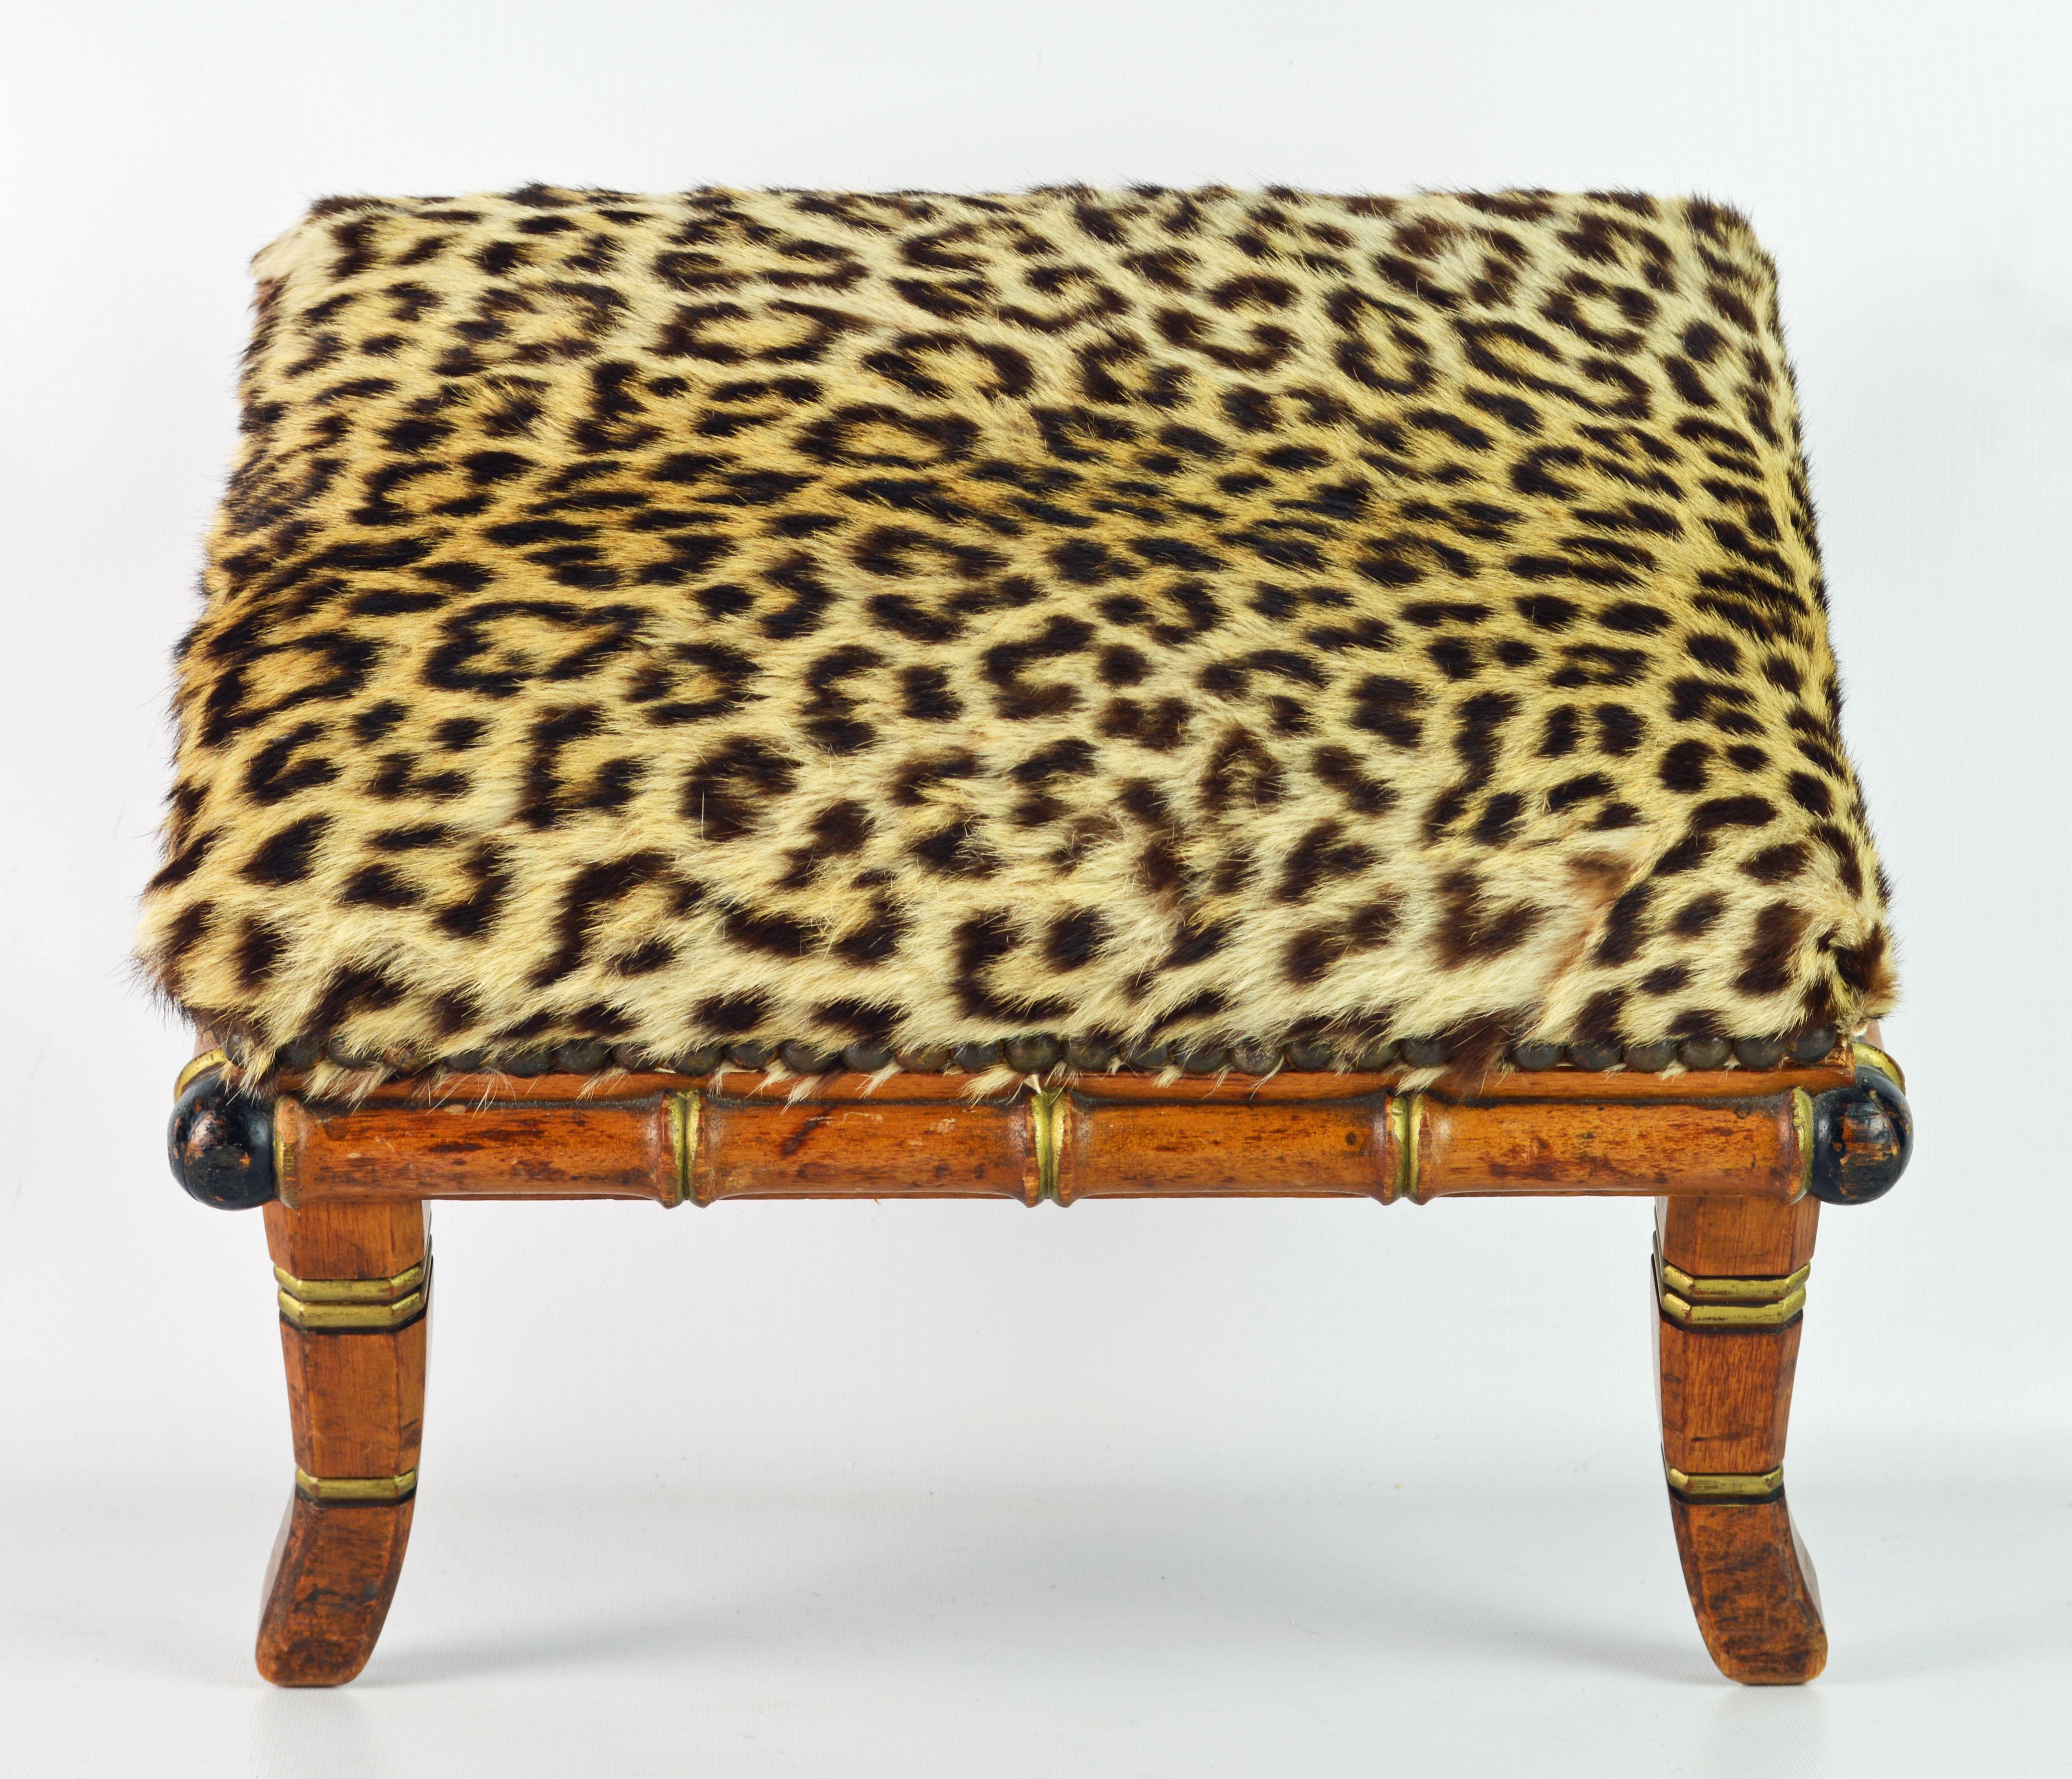 Unique Leopard Covered English Aesthetic Movement Faux Bamboo Footstool 1